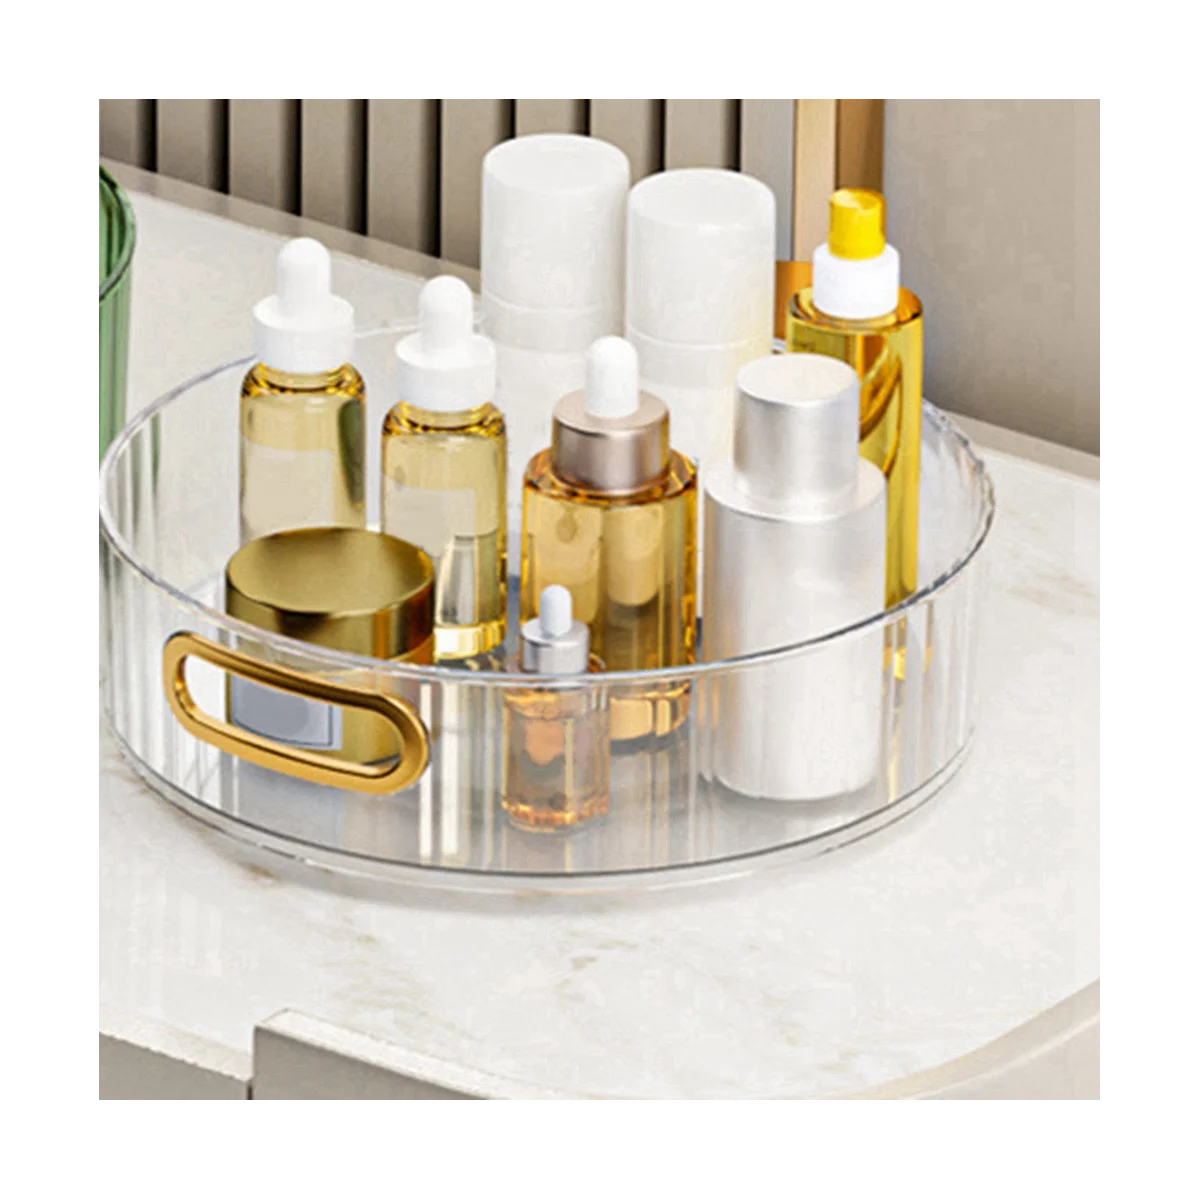 

Clear Organizer for Spices, 360° Rotating Turntable Organization & Storage Container Bins for Cabinet, Table,Pantry